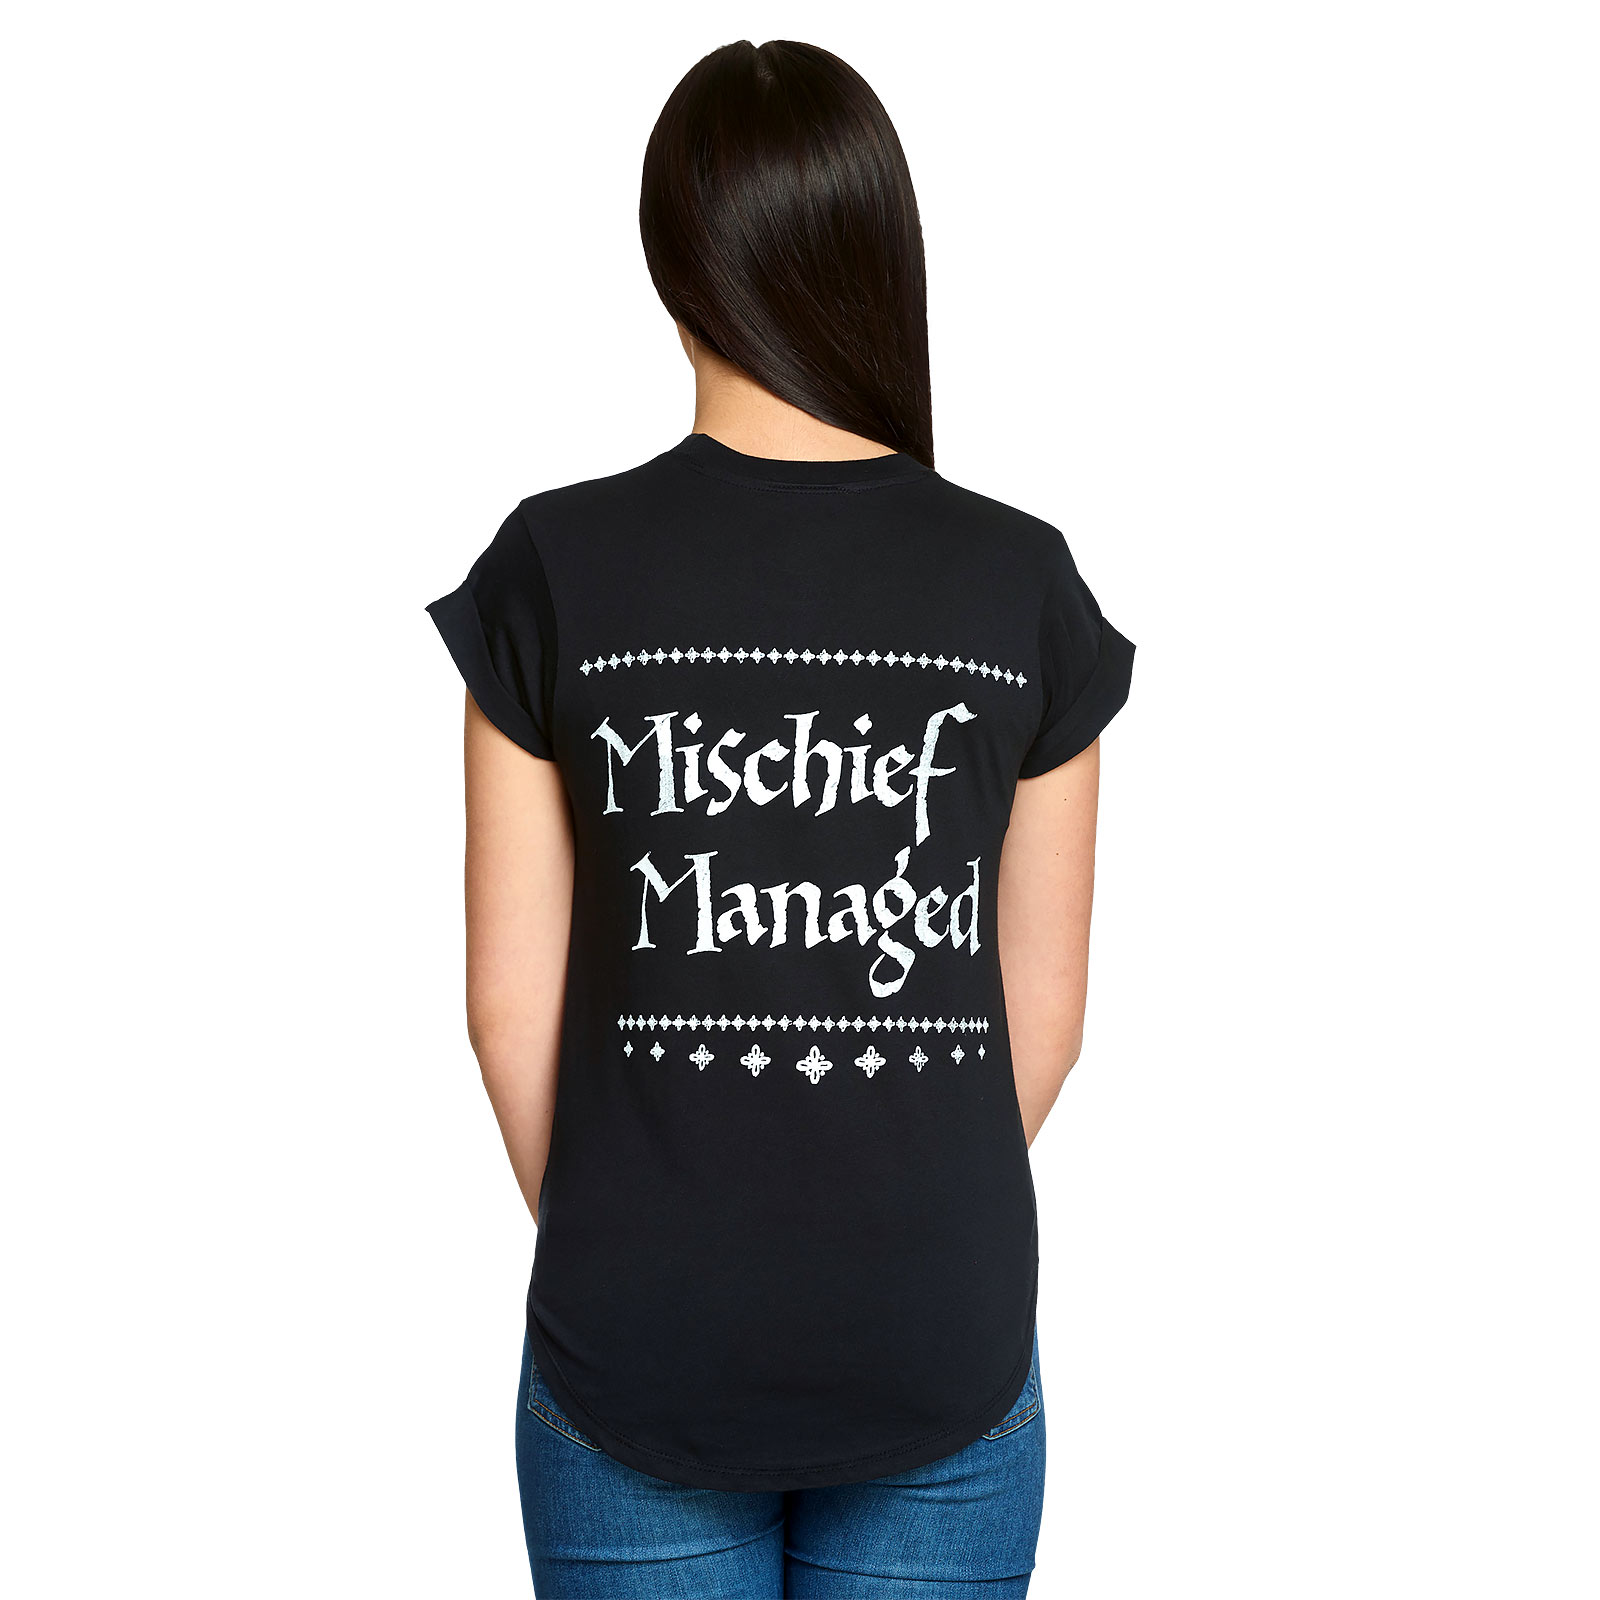 Harry Potter - Mischief Managed Women's Loose Fit T-Shirt Black